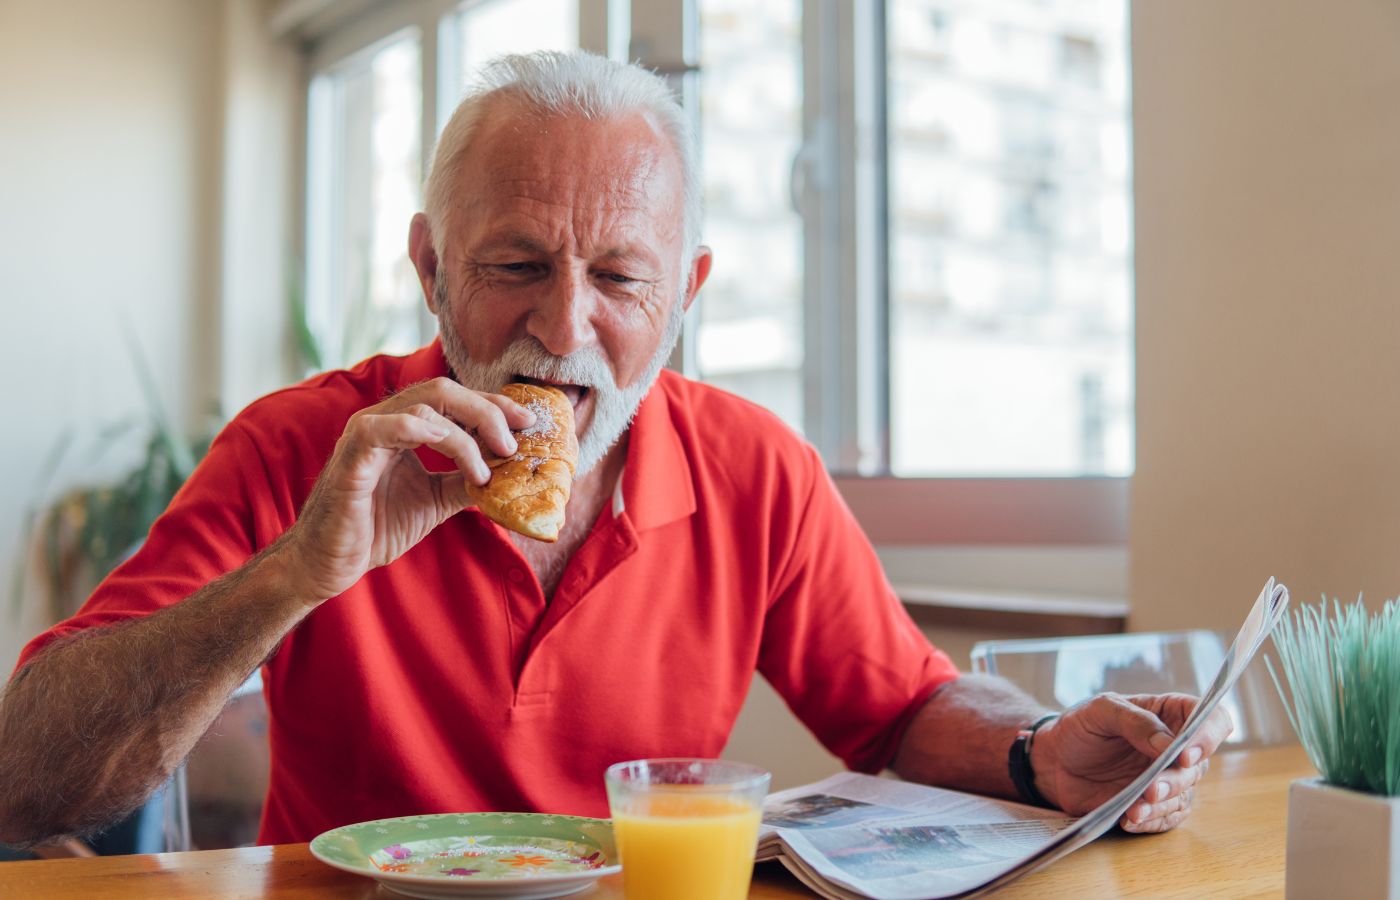 Older man sitting at a table eating and drinking